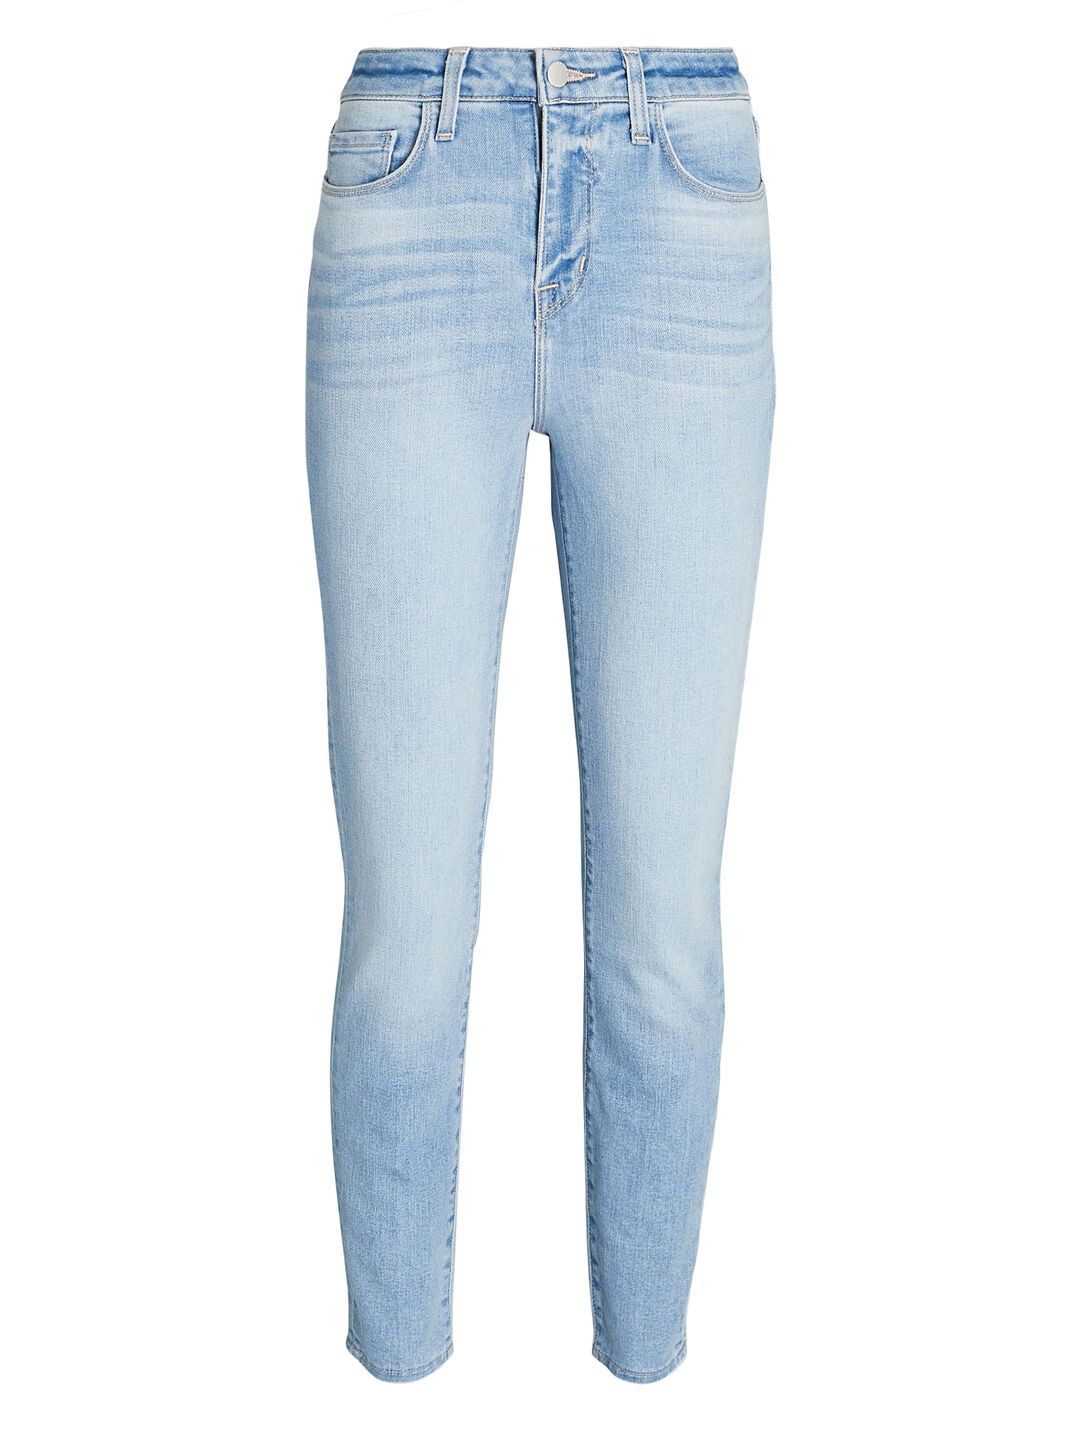 L'Agence Margot High-Rise Skinny Jeans in Light Blue | INTERMIX®